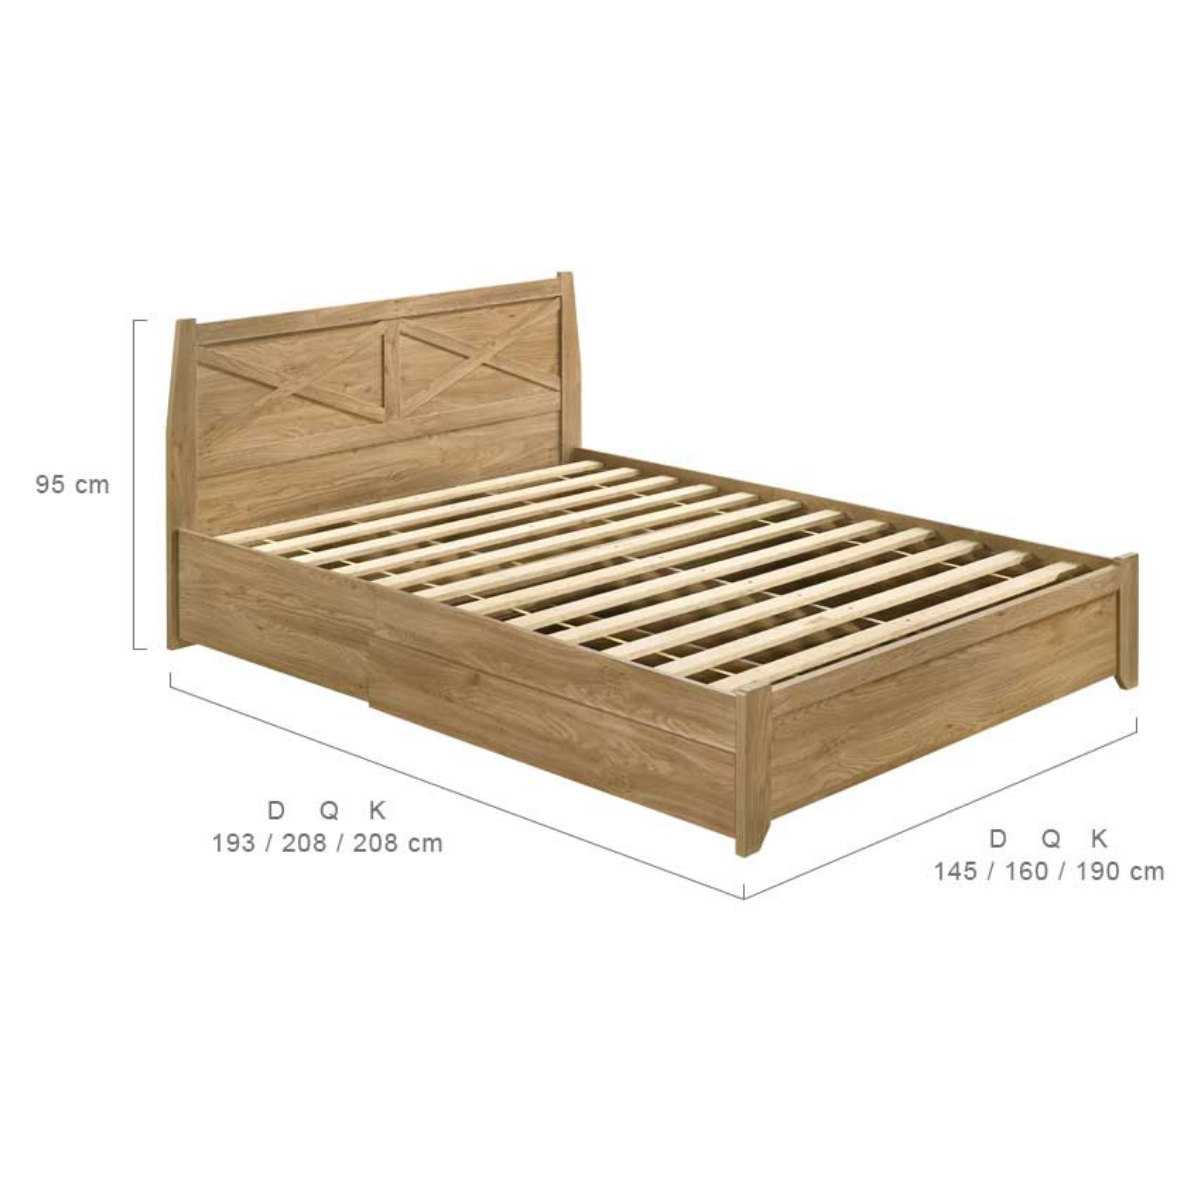 Cobar Natural Wooden Bed Frame with Storage Drawers King